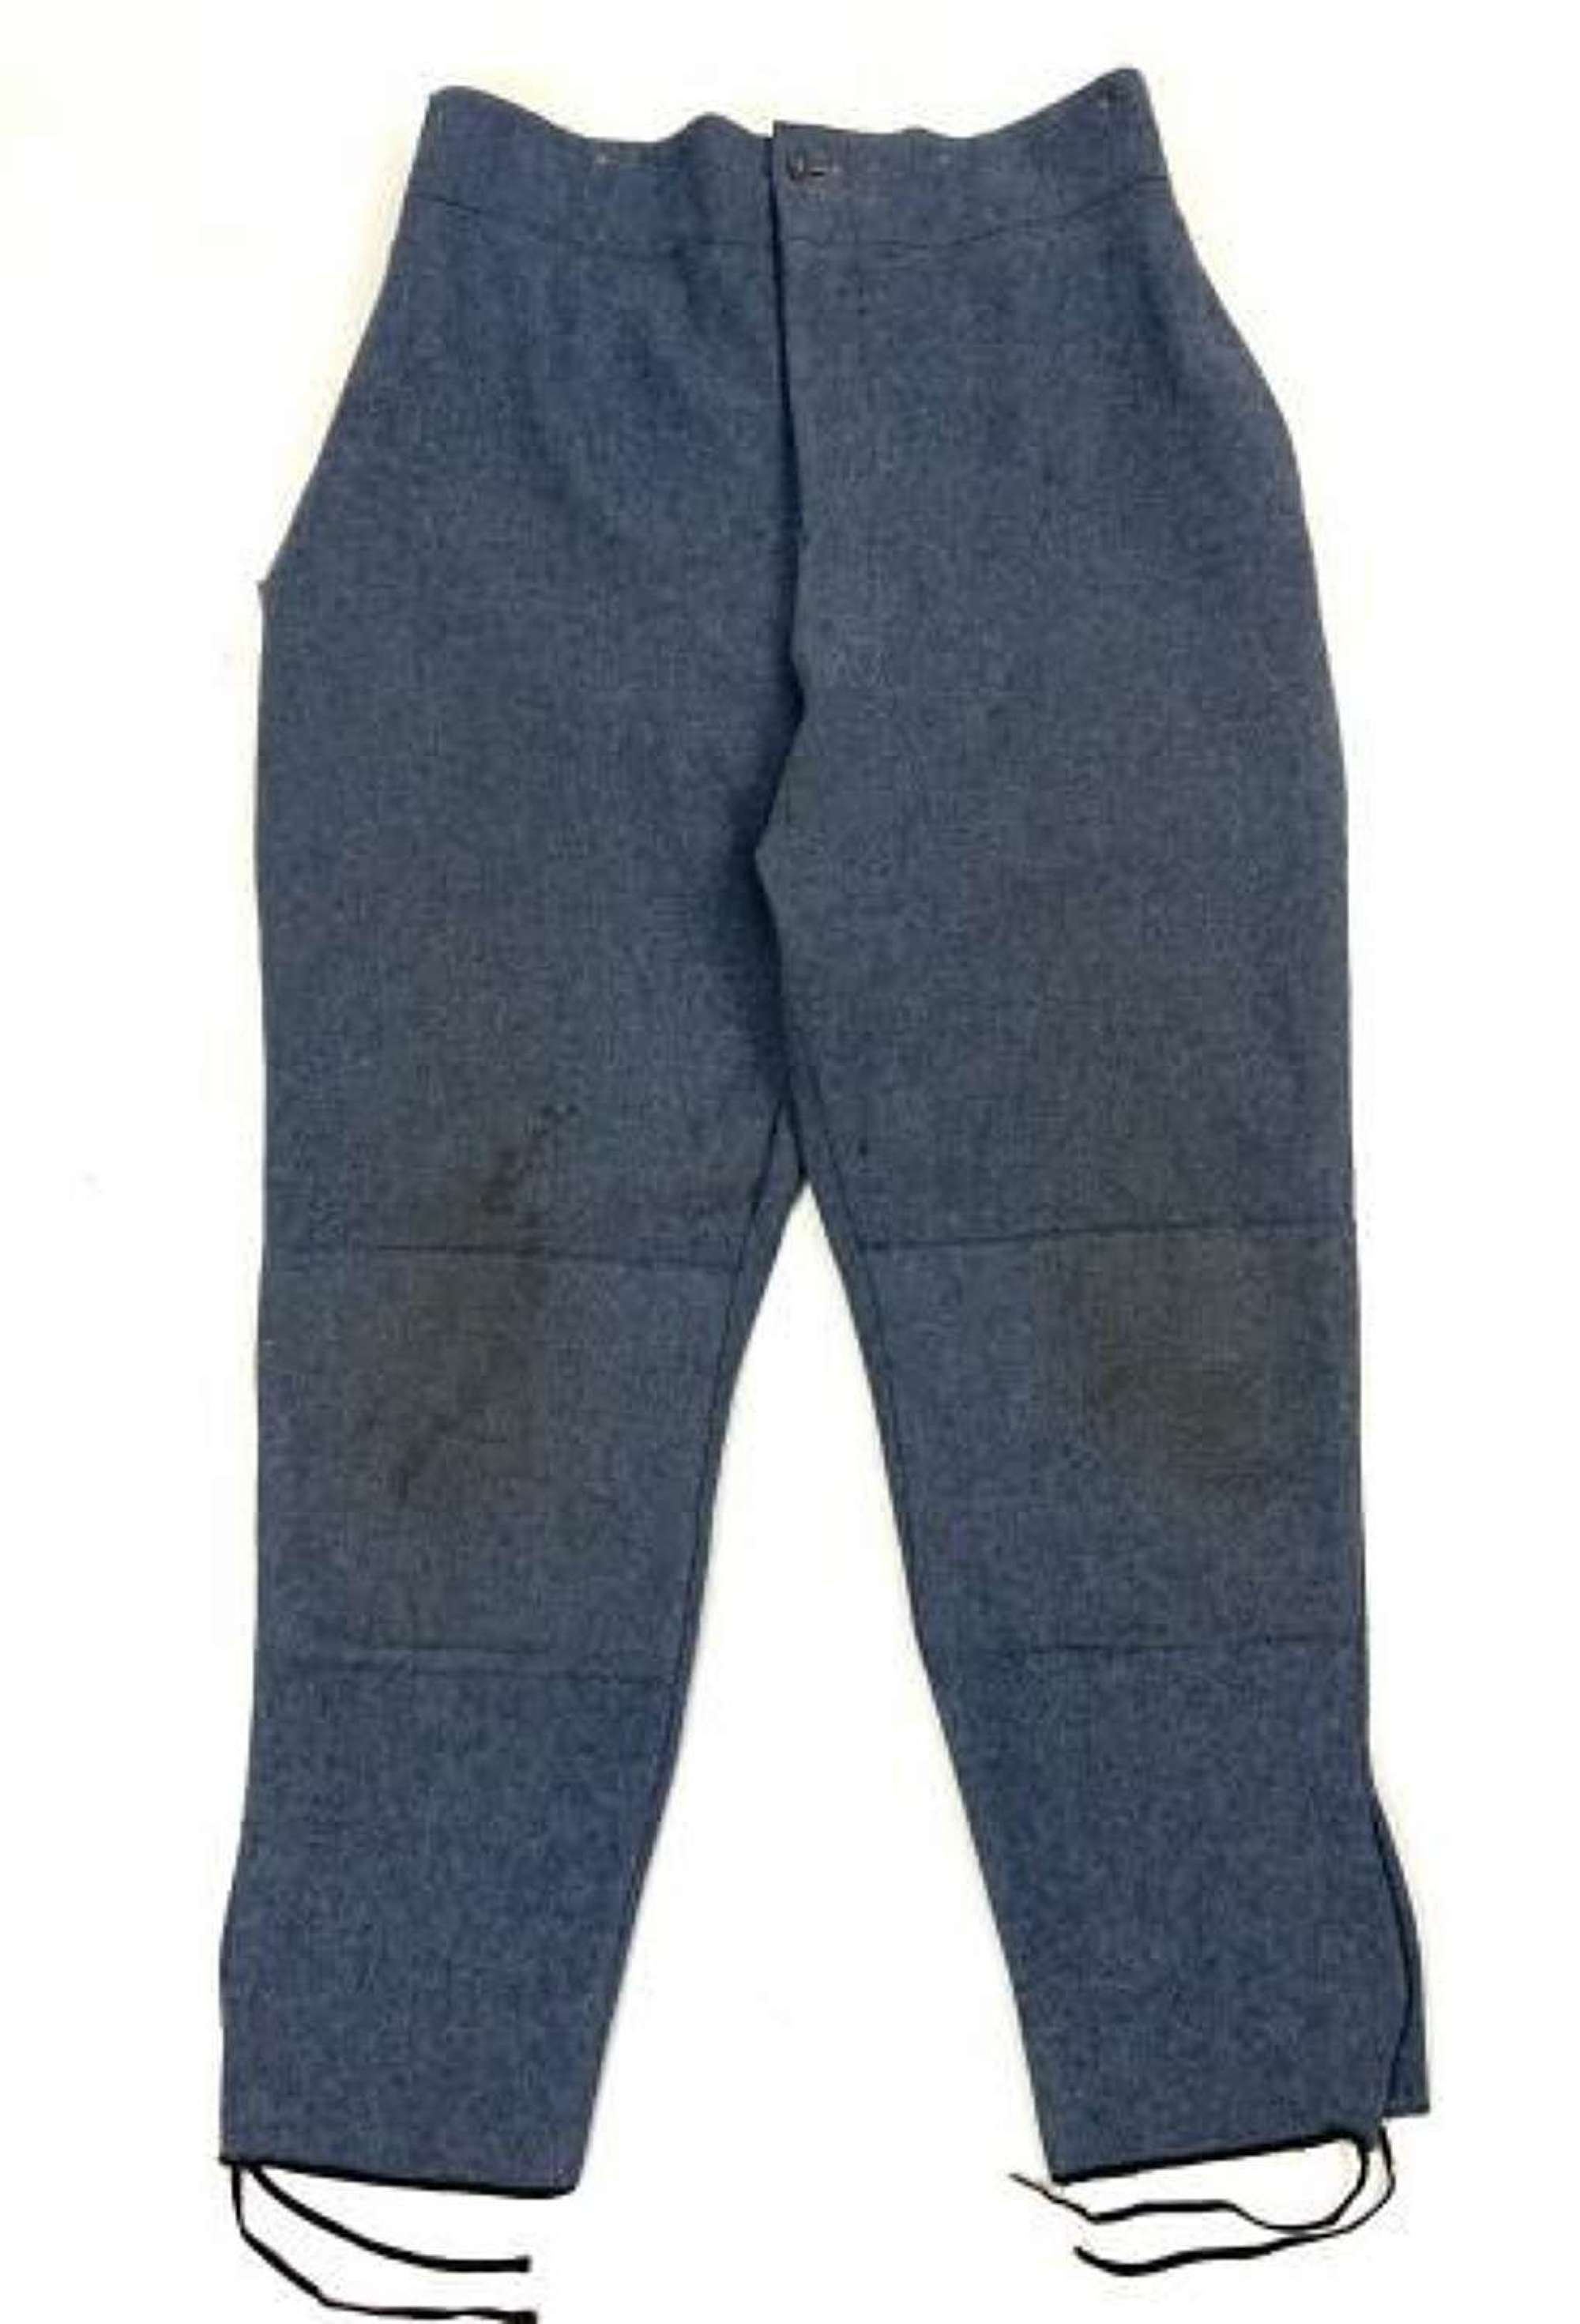 Original Great War French Army Horizon Blue Enlisted Men's Trousers